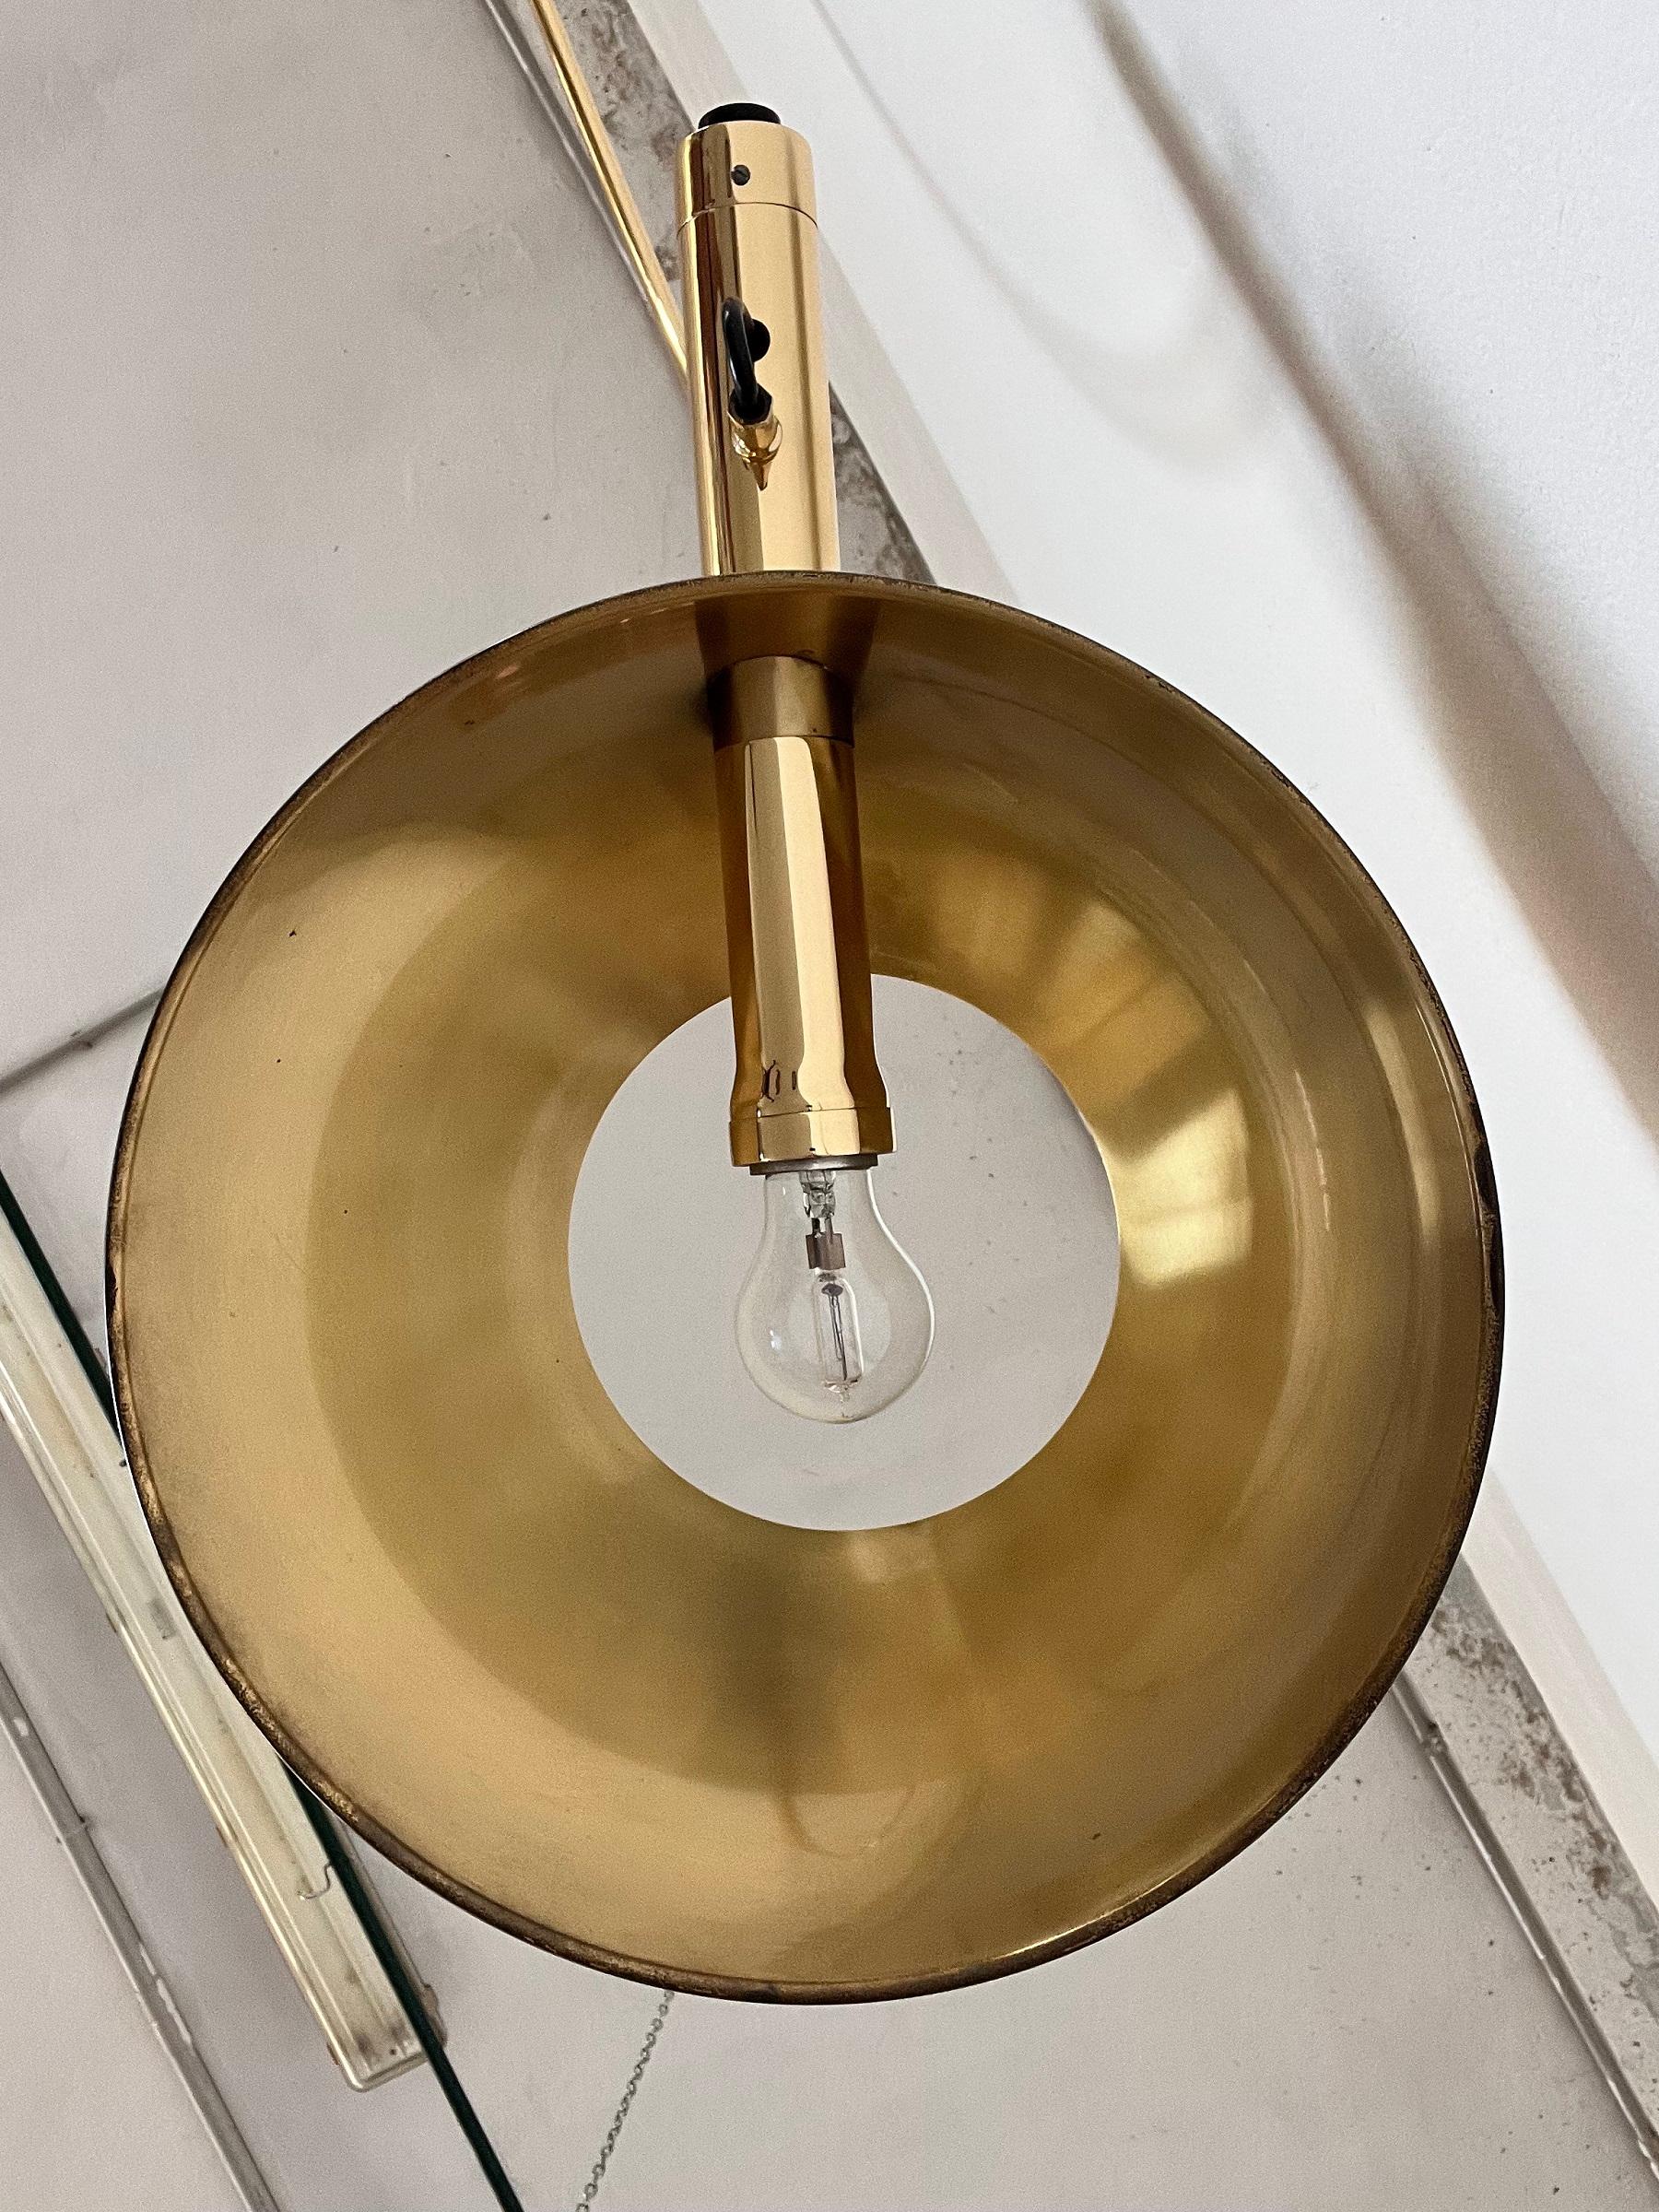 Florian Schulz Vintage Adjustable Wall Mounted Arc Lamp in Brass, 1970s 3